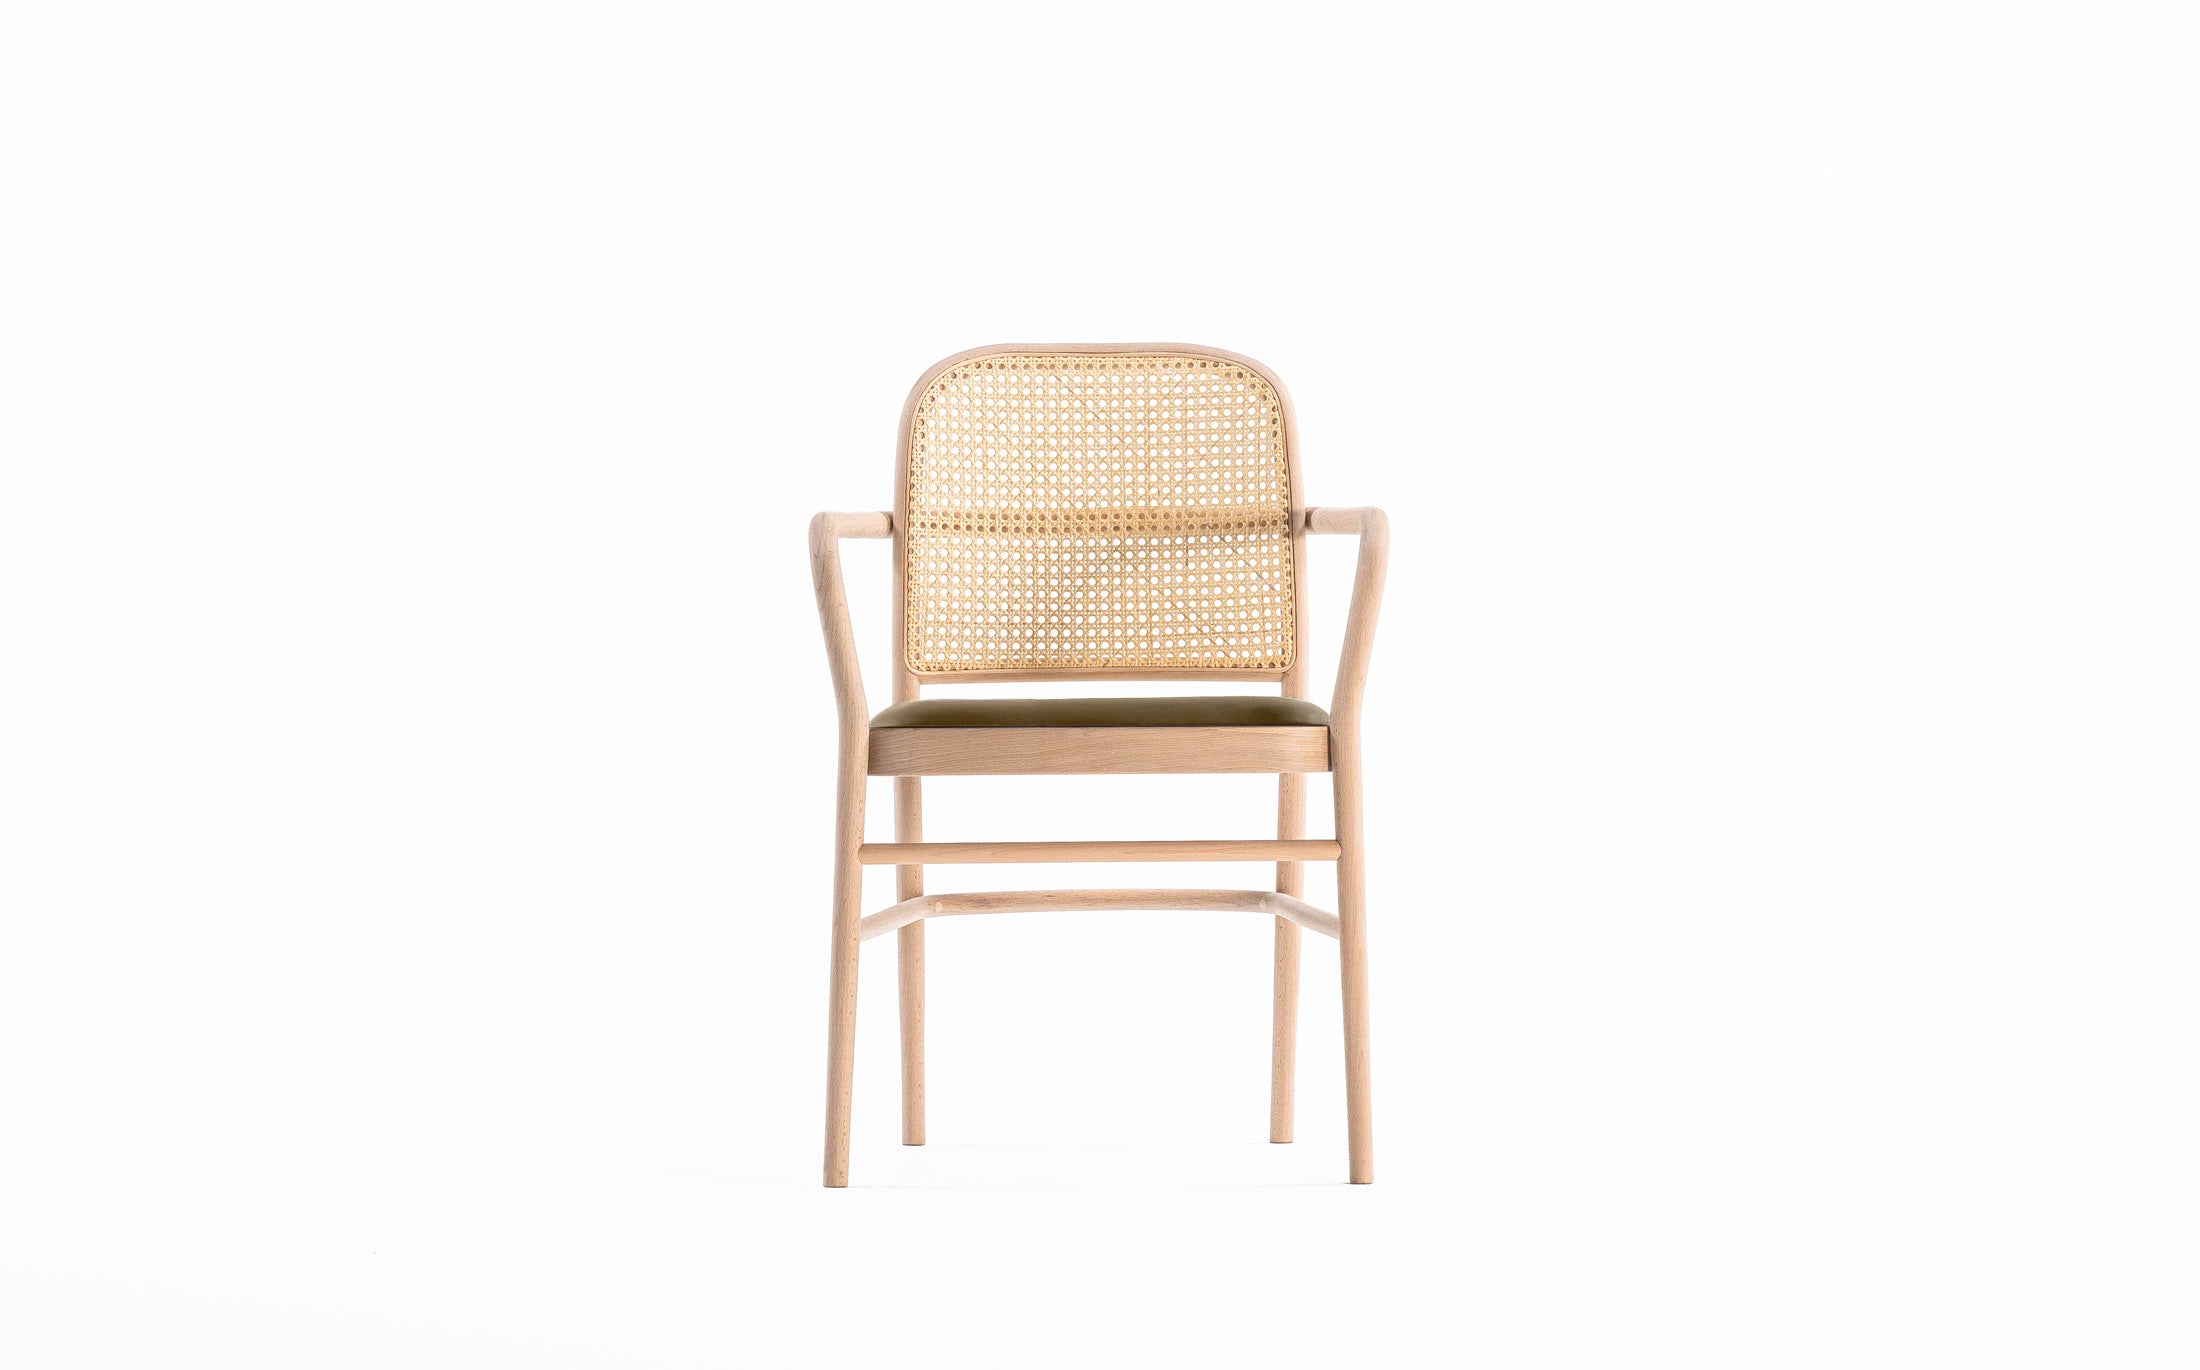 The bent armchair #Seat materials_smooth leather 40108